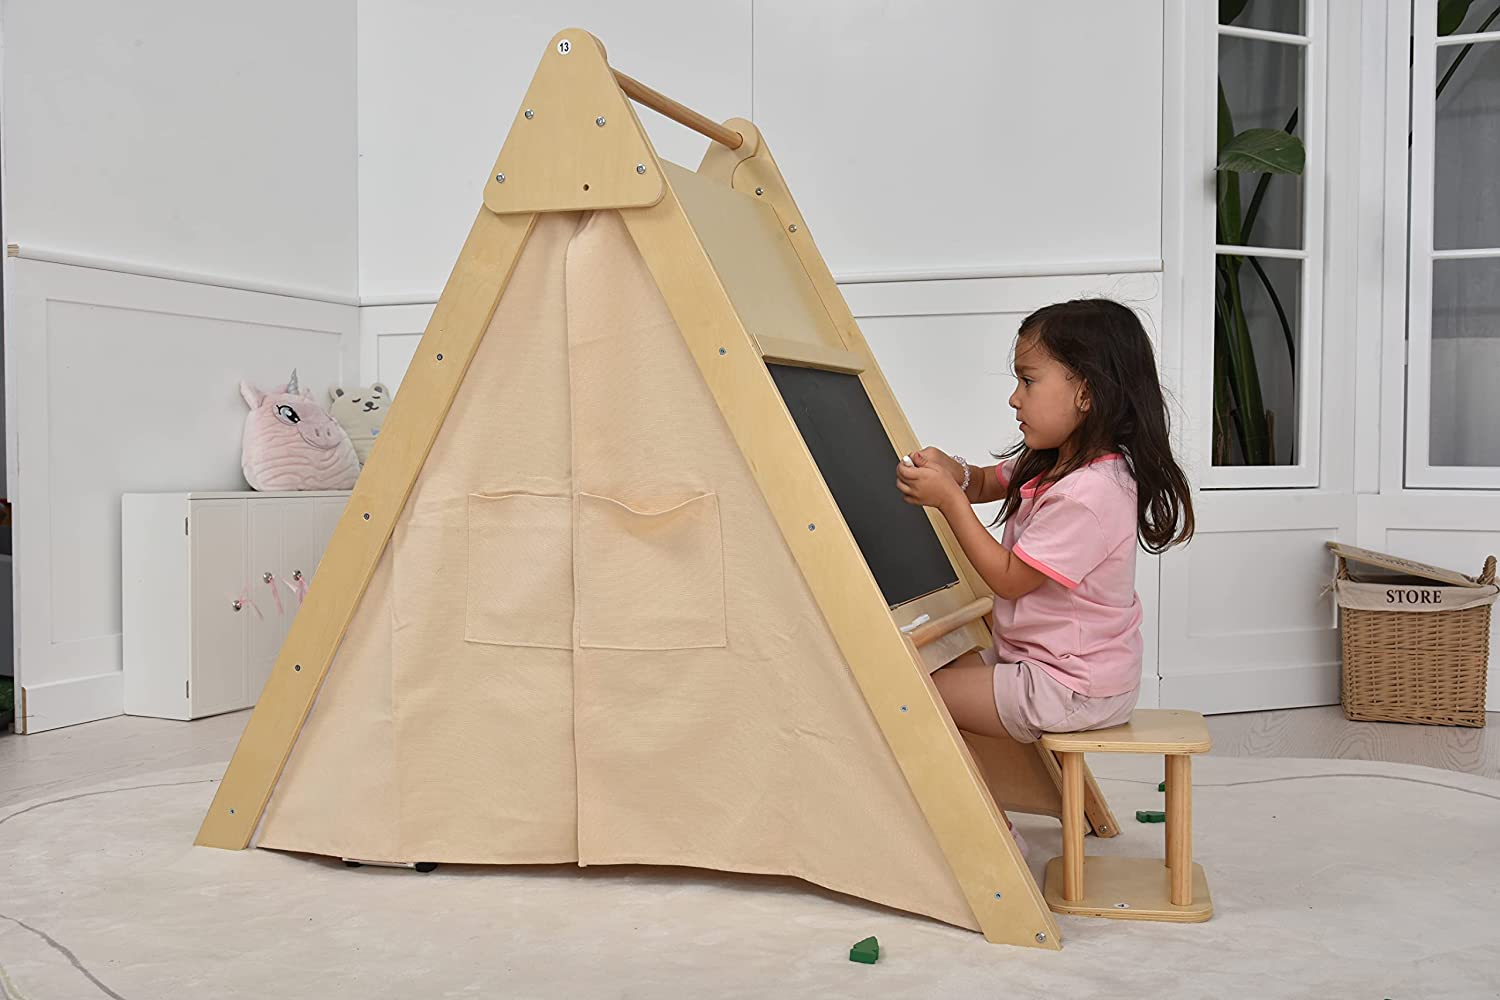 Oak - Wood Learning Tent and Climber with Desk and Chair